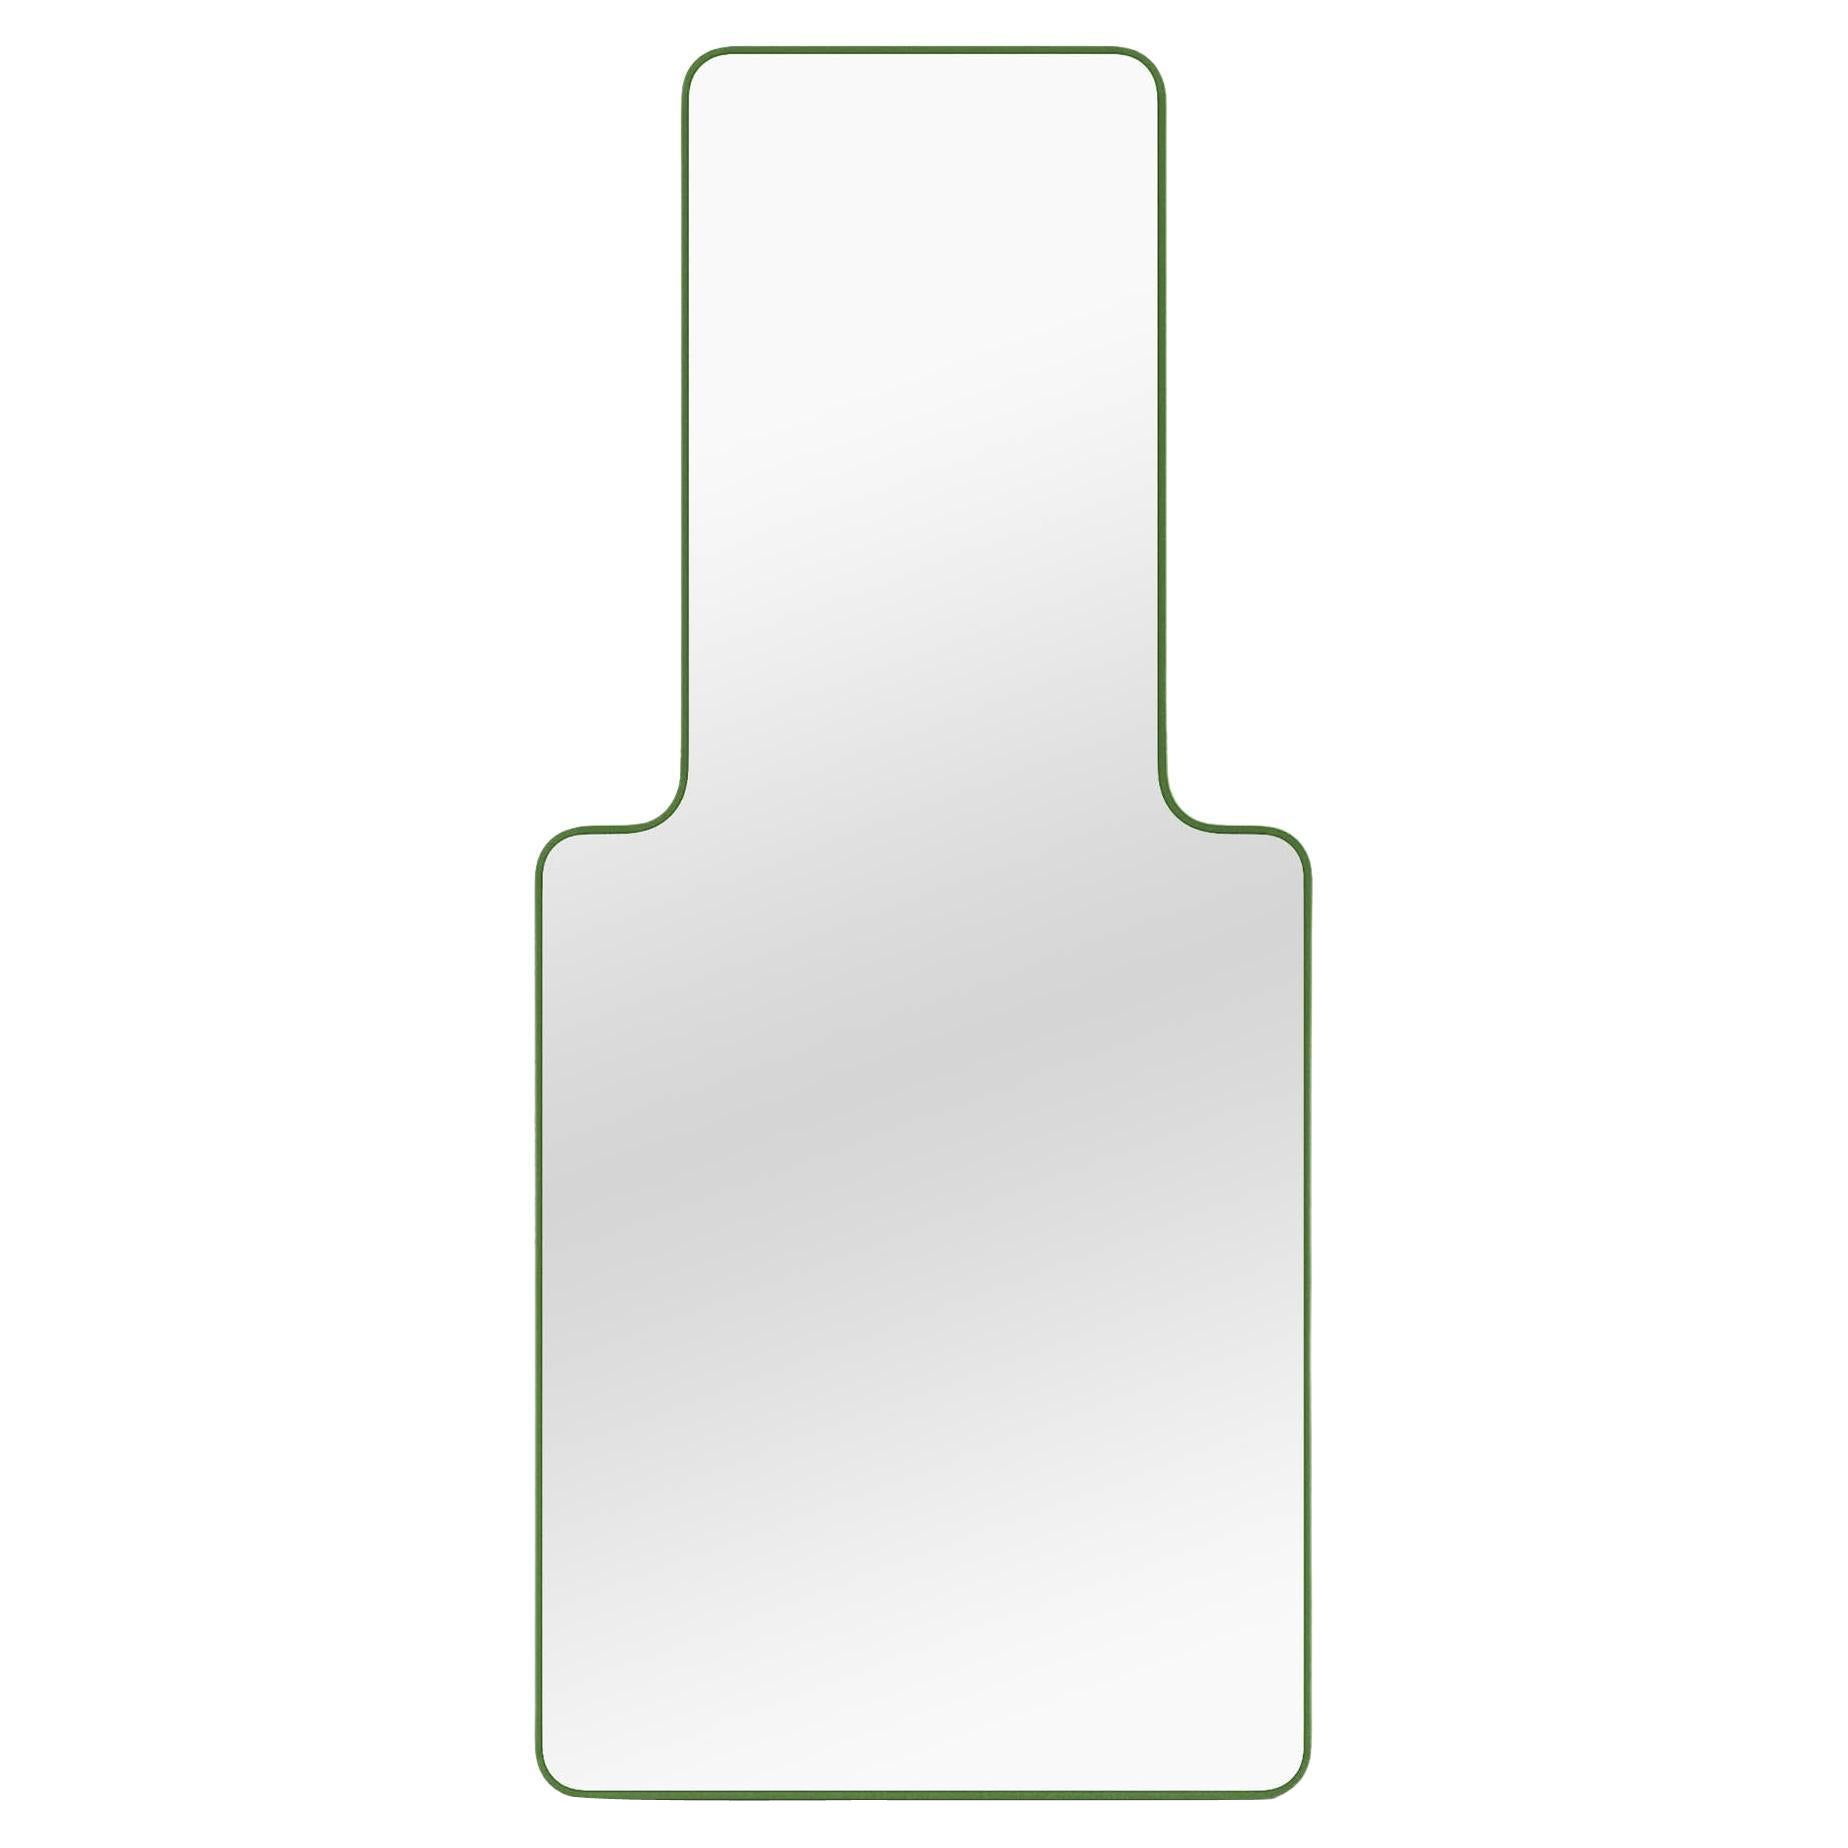 Contemporary Mirror 'Loveself 03' by Oitoproducts, Green Frame